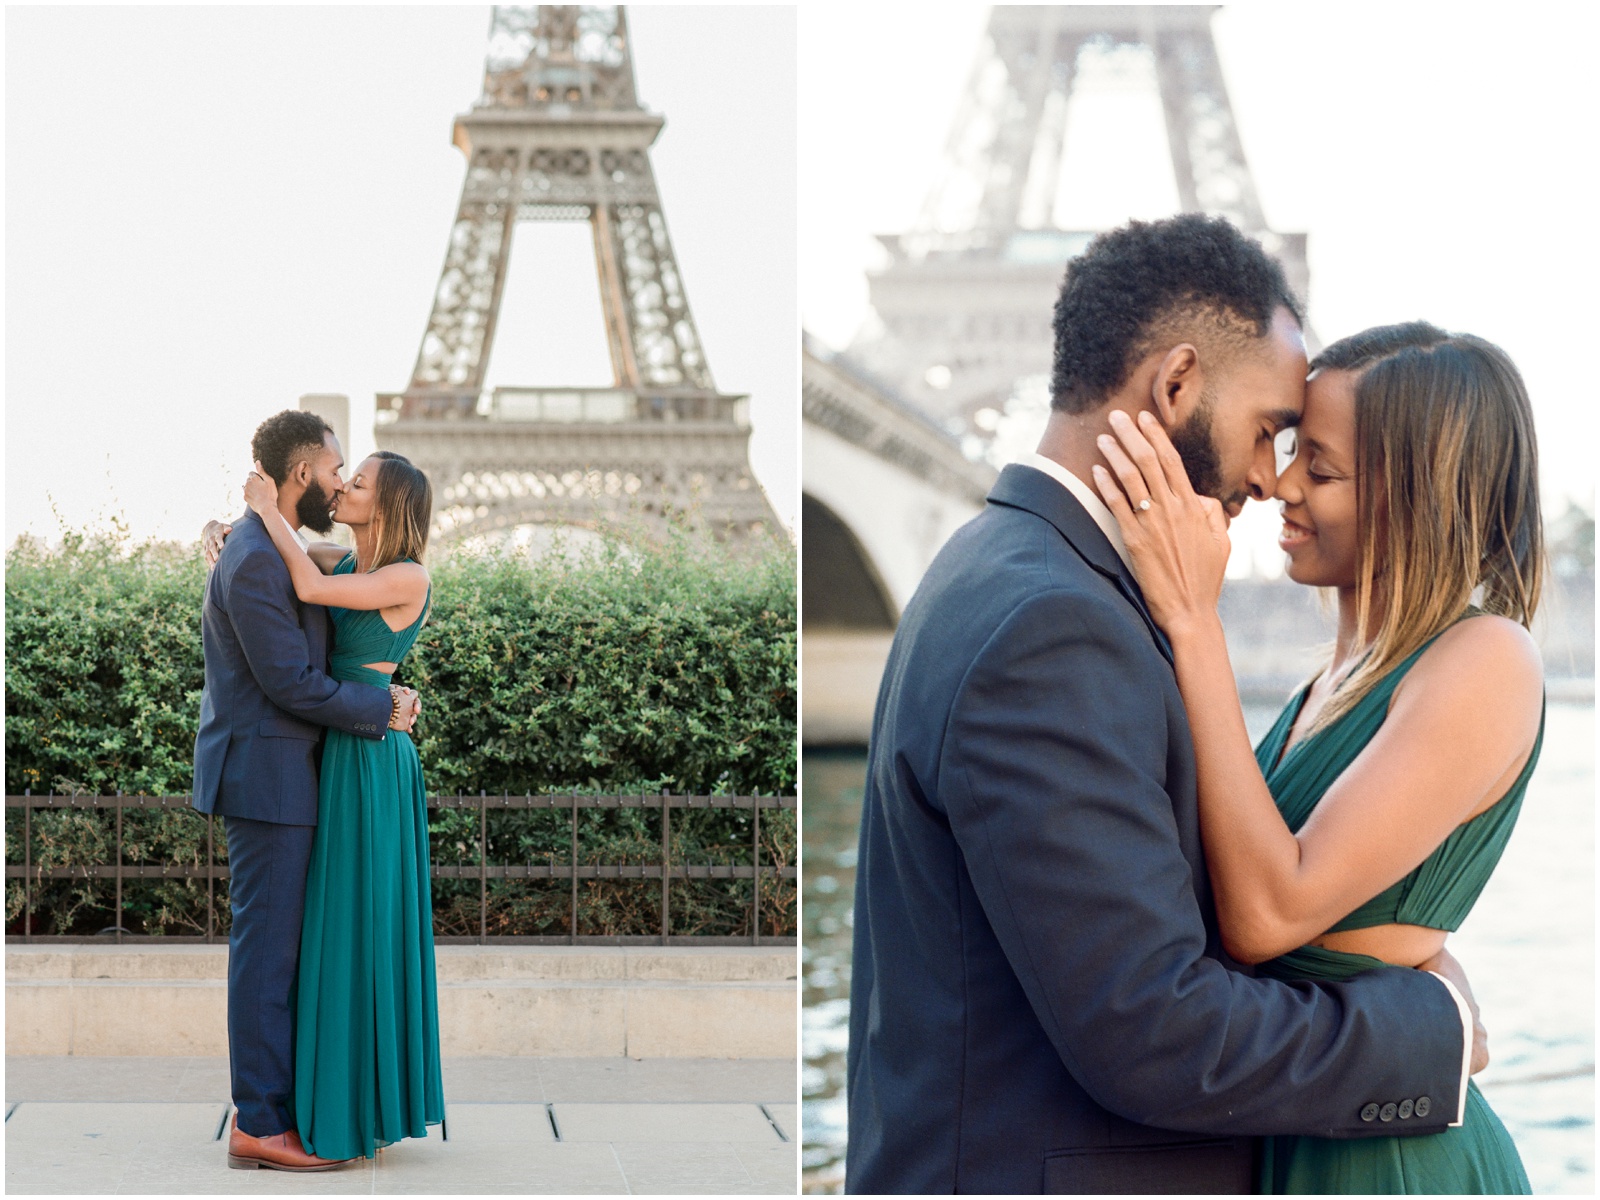 Engaged couple in front of Eiffel Tower